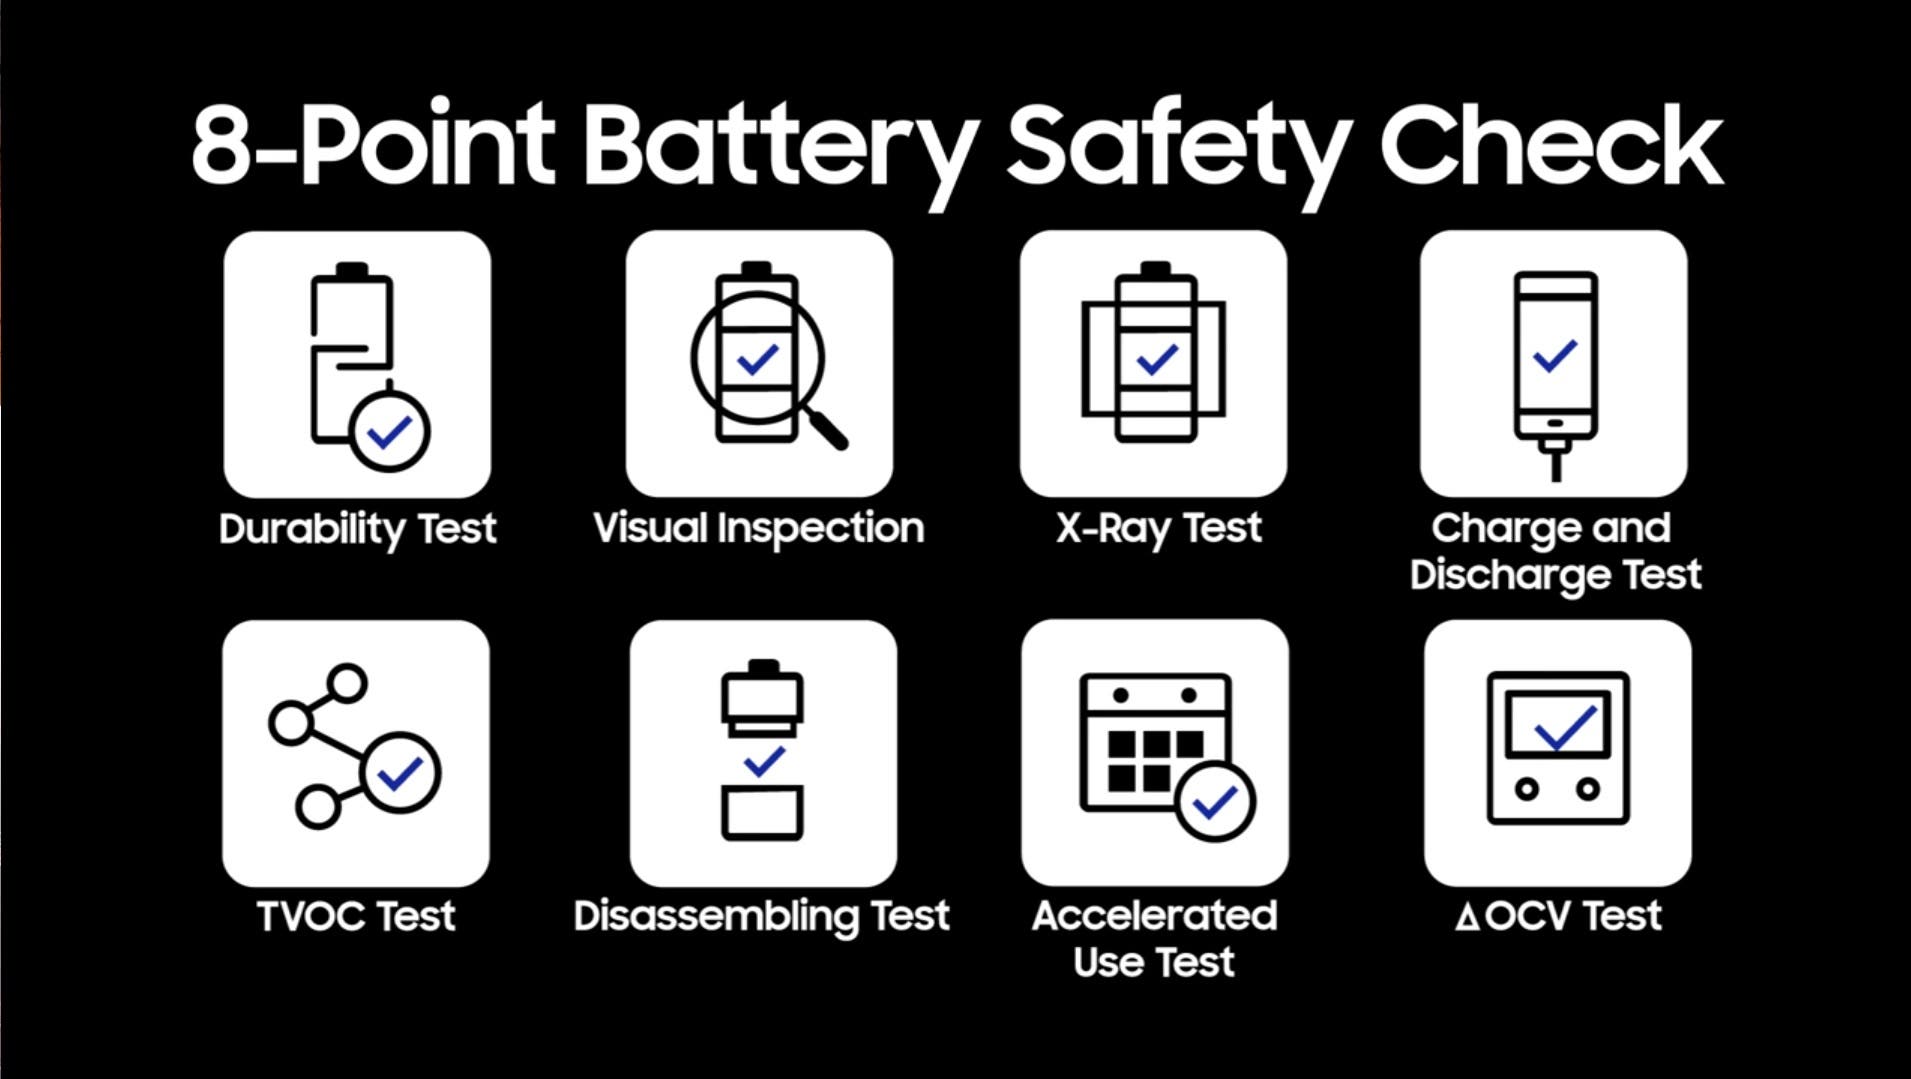 Samsung Note 7 battery